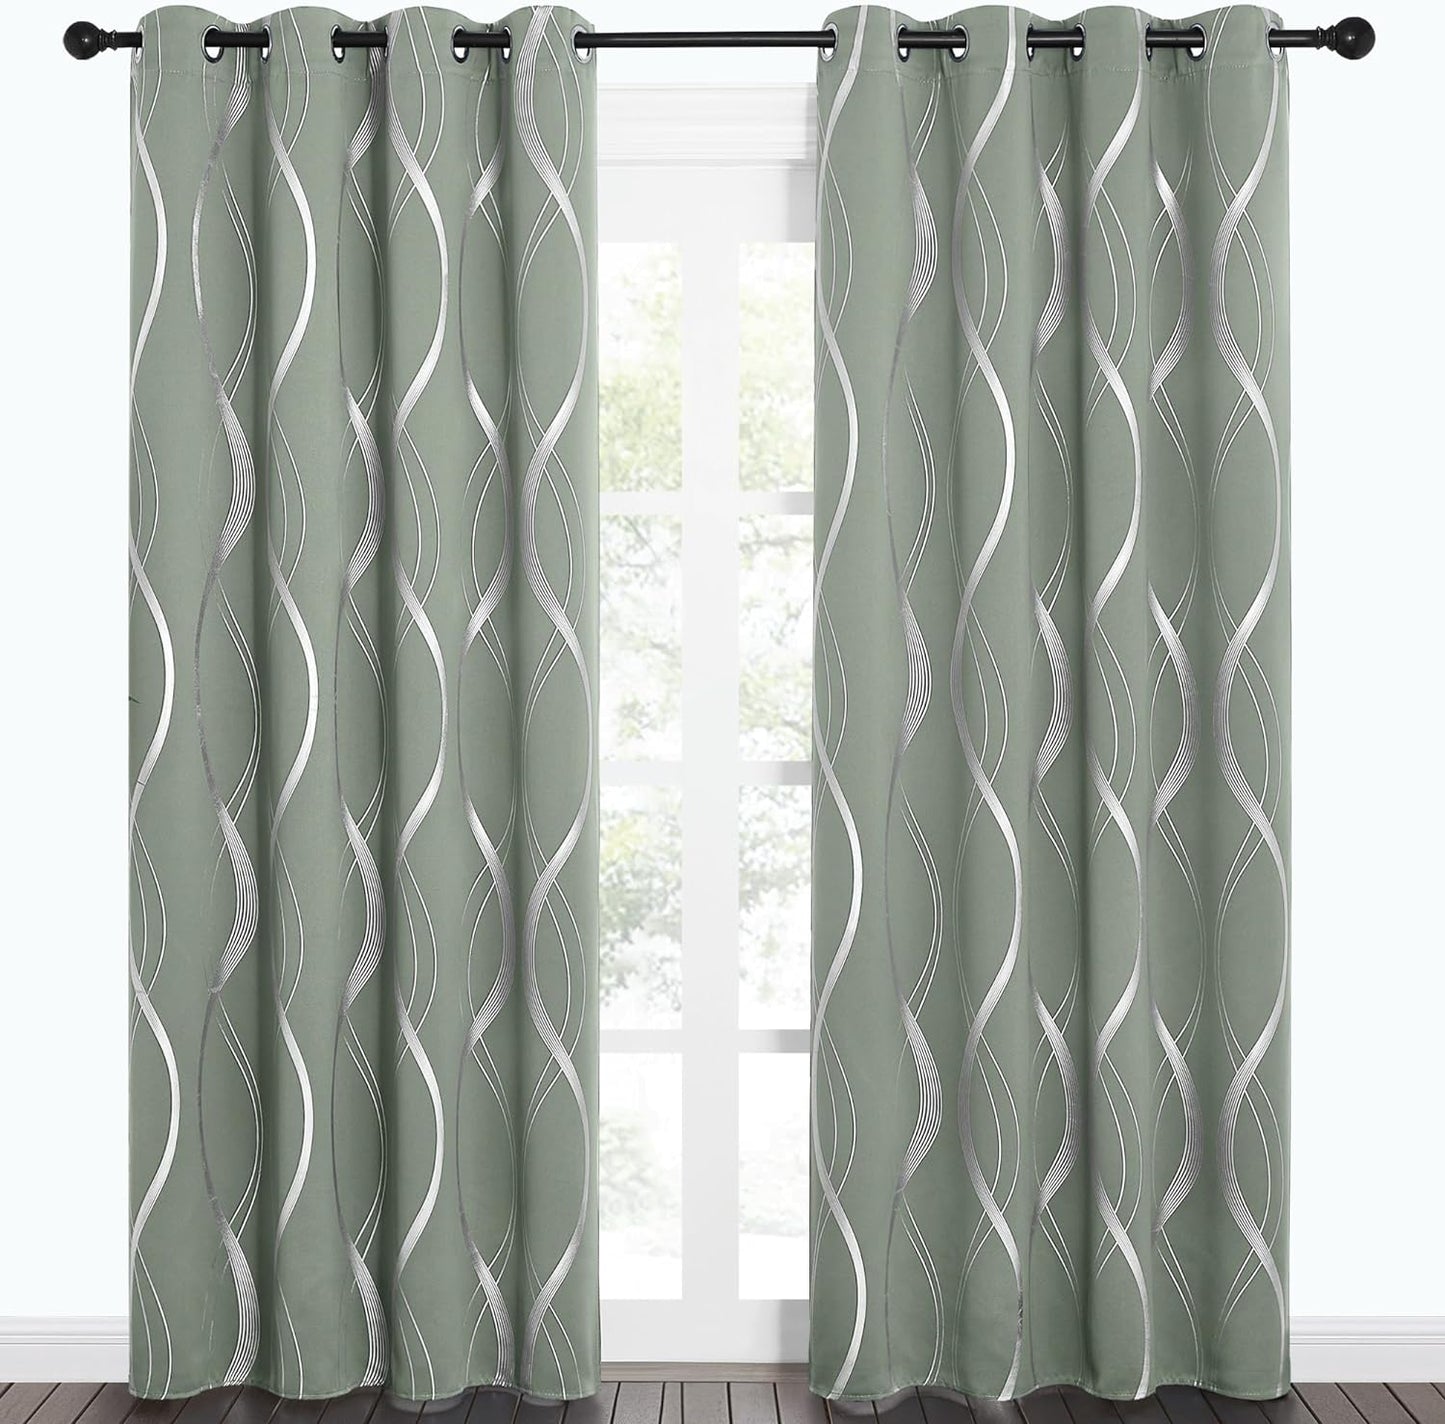 NICETOWN Grey Blackout Curtains 84 Inch Length 2 Panels Set for Bedroom/Living Room, Noise Reducing Thermal Insulated Wave Line Foil Print Drapes for Patio Sliding Glass Door (52 X 84, Gray)  NICETOWN Greyish Green 52"W X 84"L 